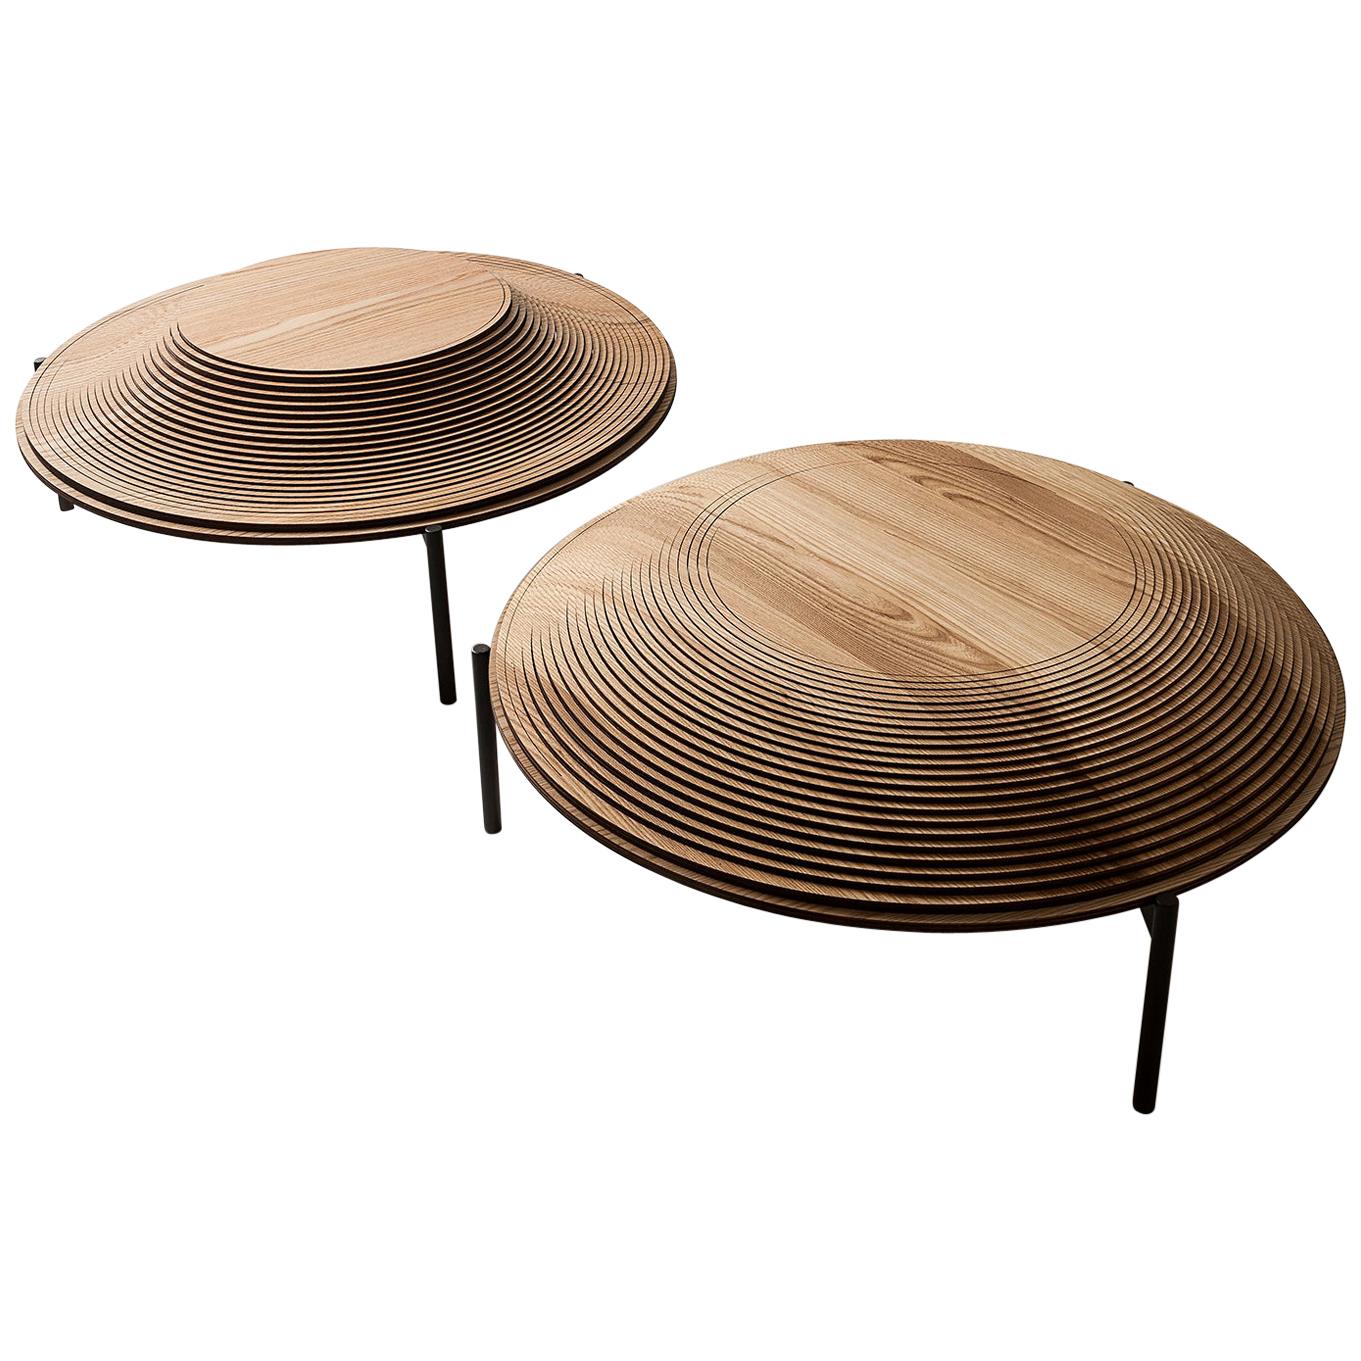 Modern Sculptural Wood Coffee Table "Dome 2 and 3" by Sebastiano Bottos, Italy